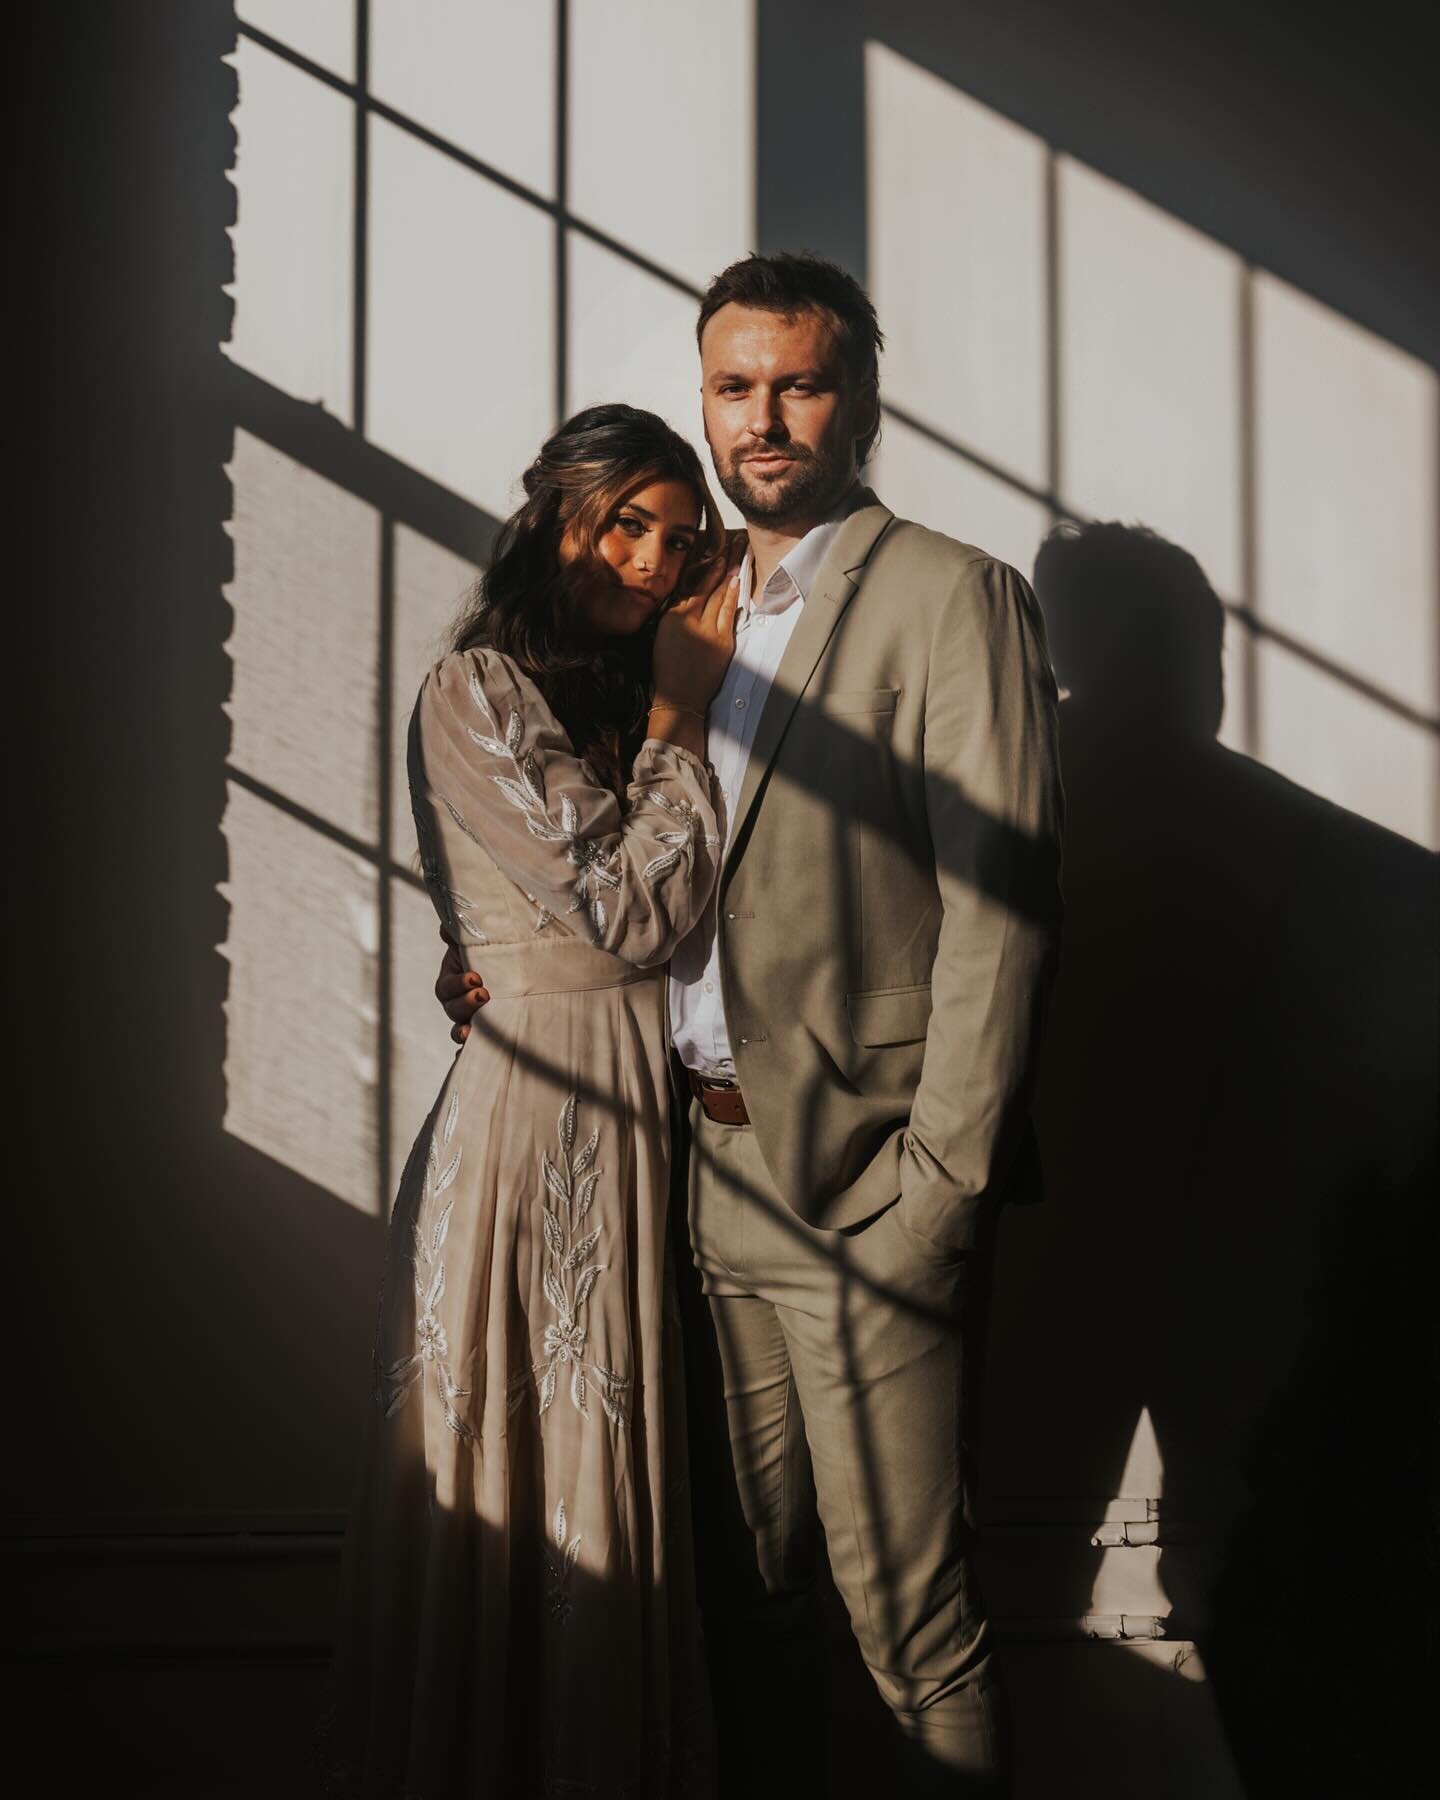 this lighting + this couple &mdash; pure perfection 
.
.
.
.
nkp team day with @nikkikatephoto 
models | @gabimolinacanty @innuendos 
hair + makeup | @goldplaited_ 
.
.
#daniellerosephotography #daniellerosephoto #DRP #chicago #chicagophotographer #e